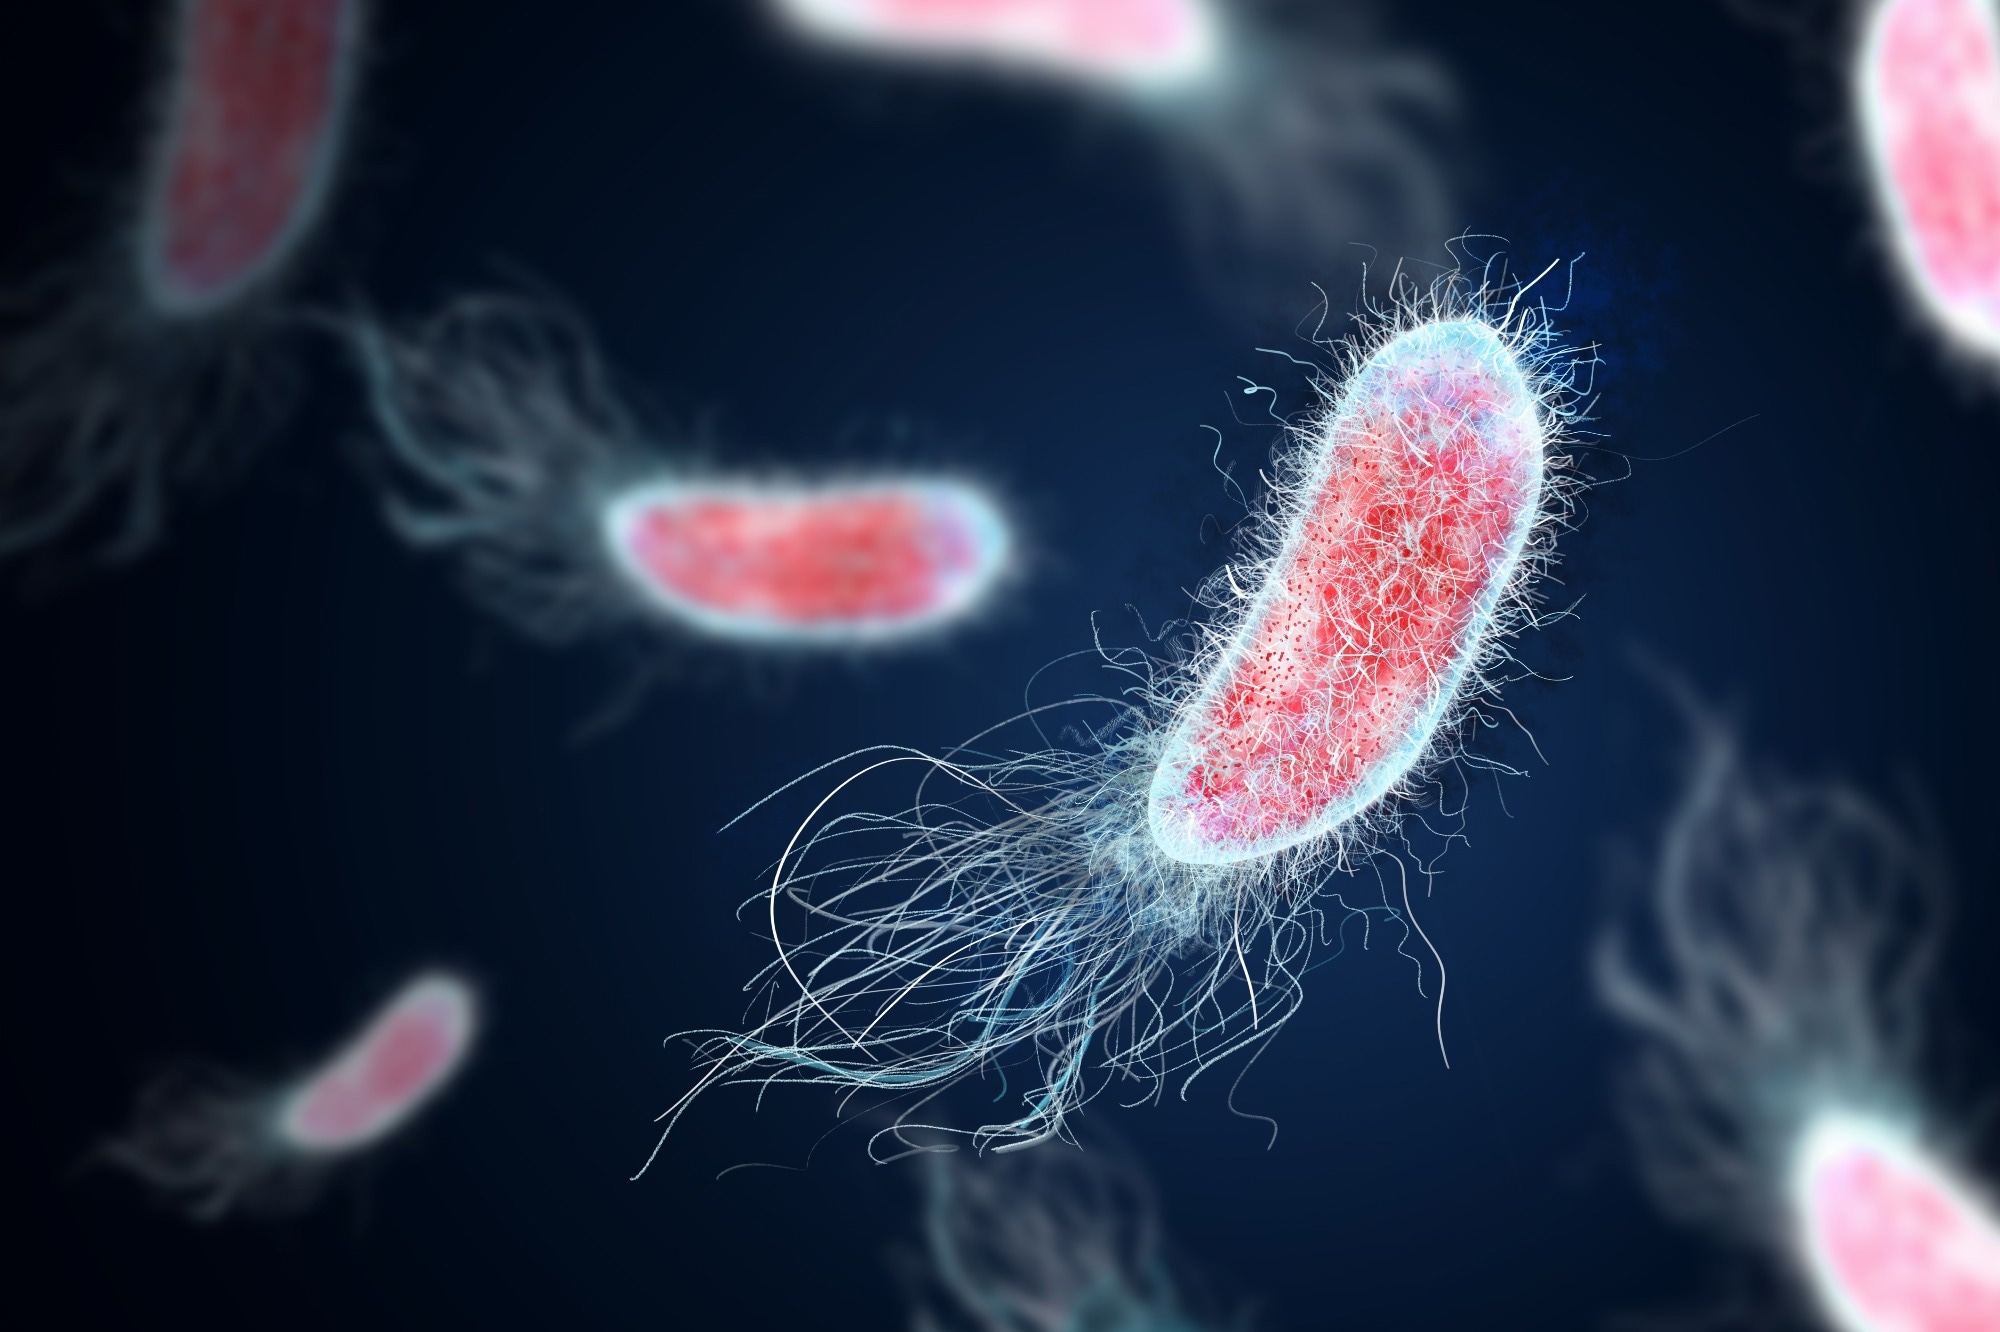 Study: Mood disorders: the gut bacteriome and beyond. Image Credit: New Africa / Shutterstock.com